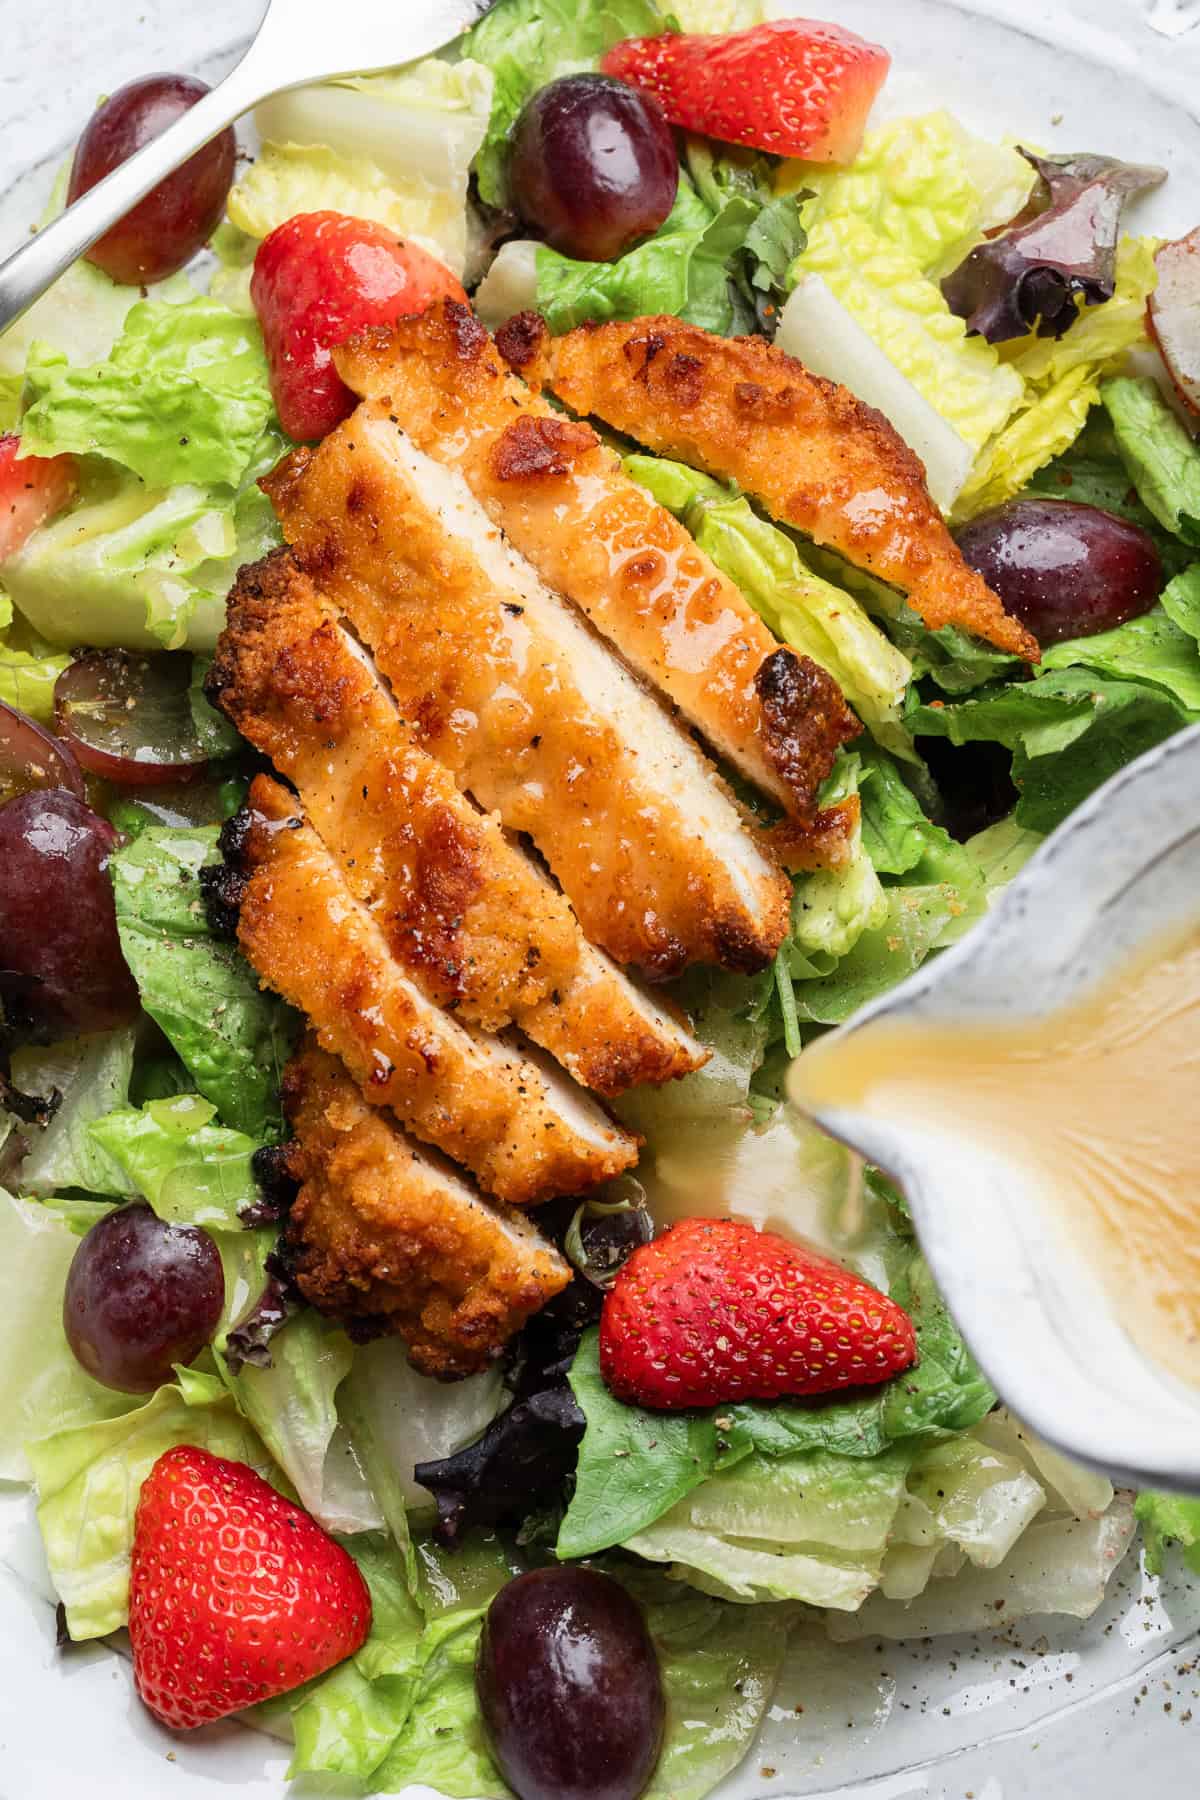 Pouring honey mustard over chicken on a salad.